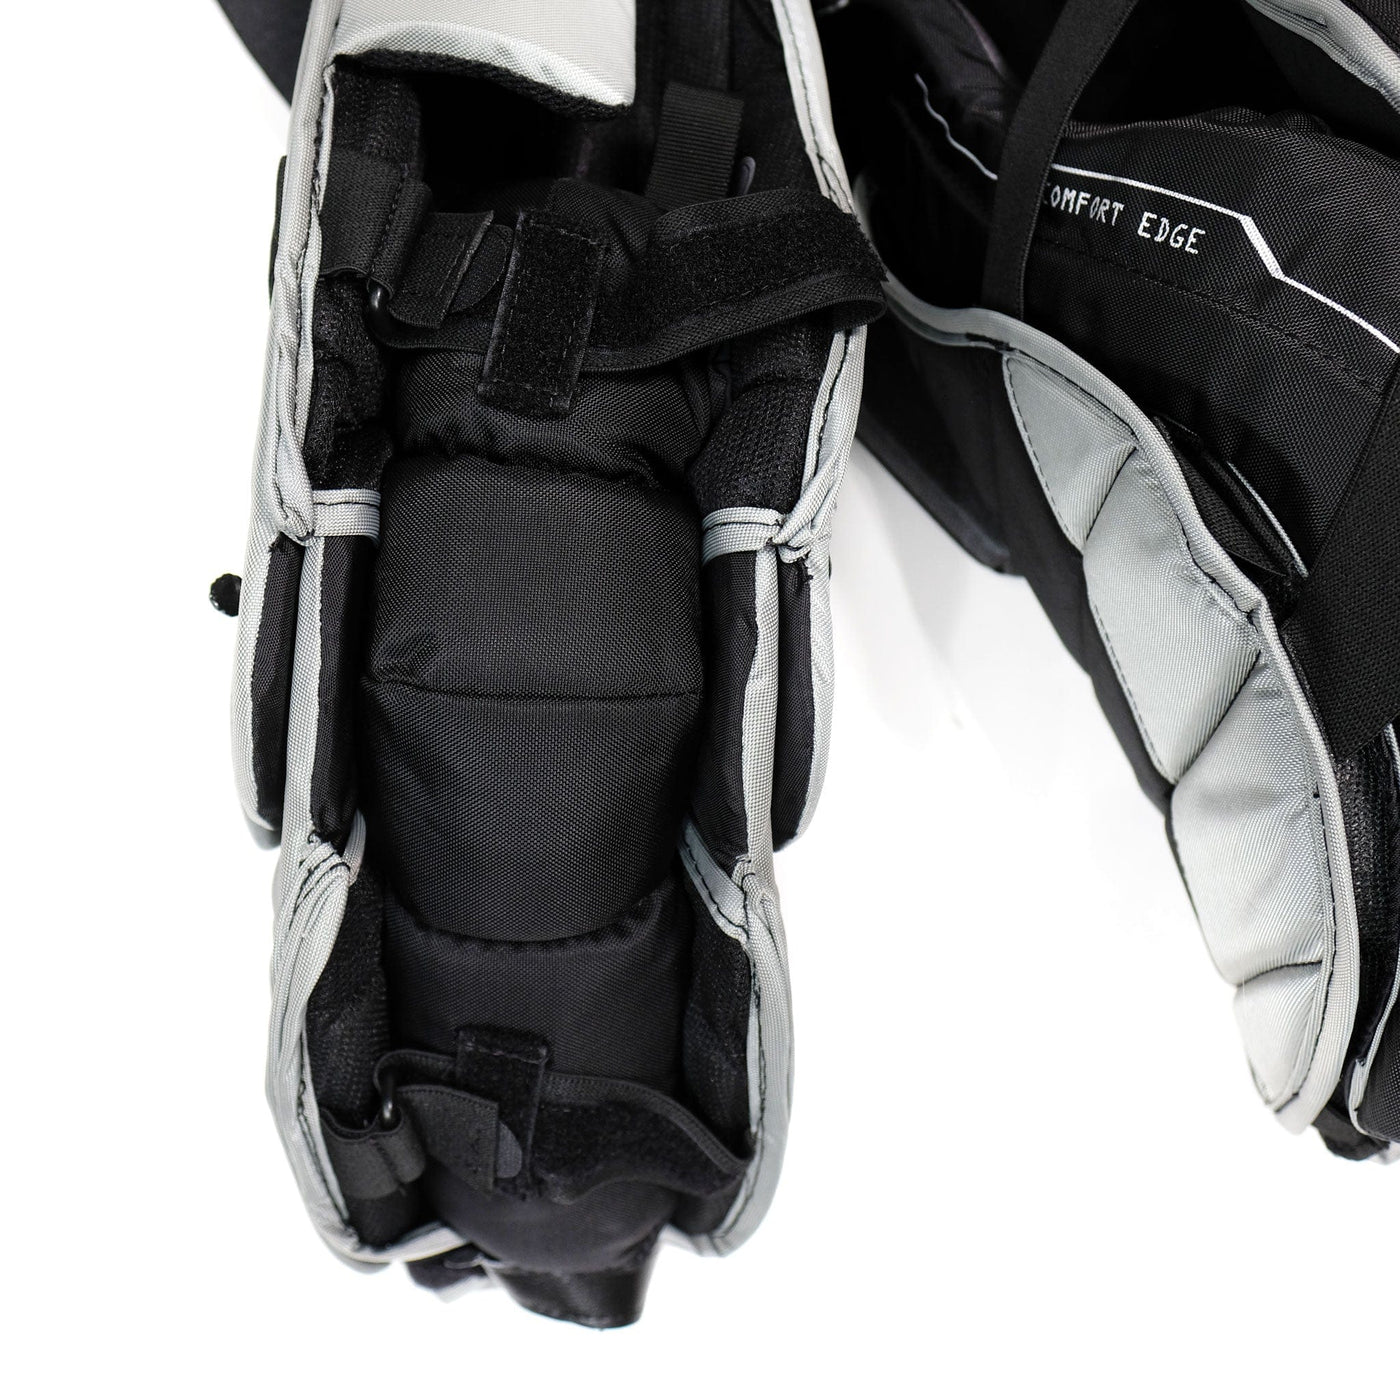 Bauer Supreme Mach Senior Chest & Arm Protector - THS SPEC - The Hockey Shop Source For Sports